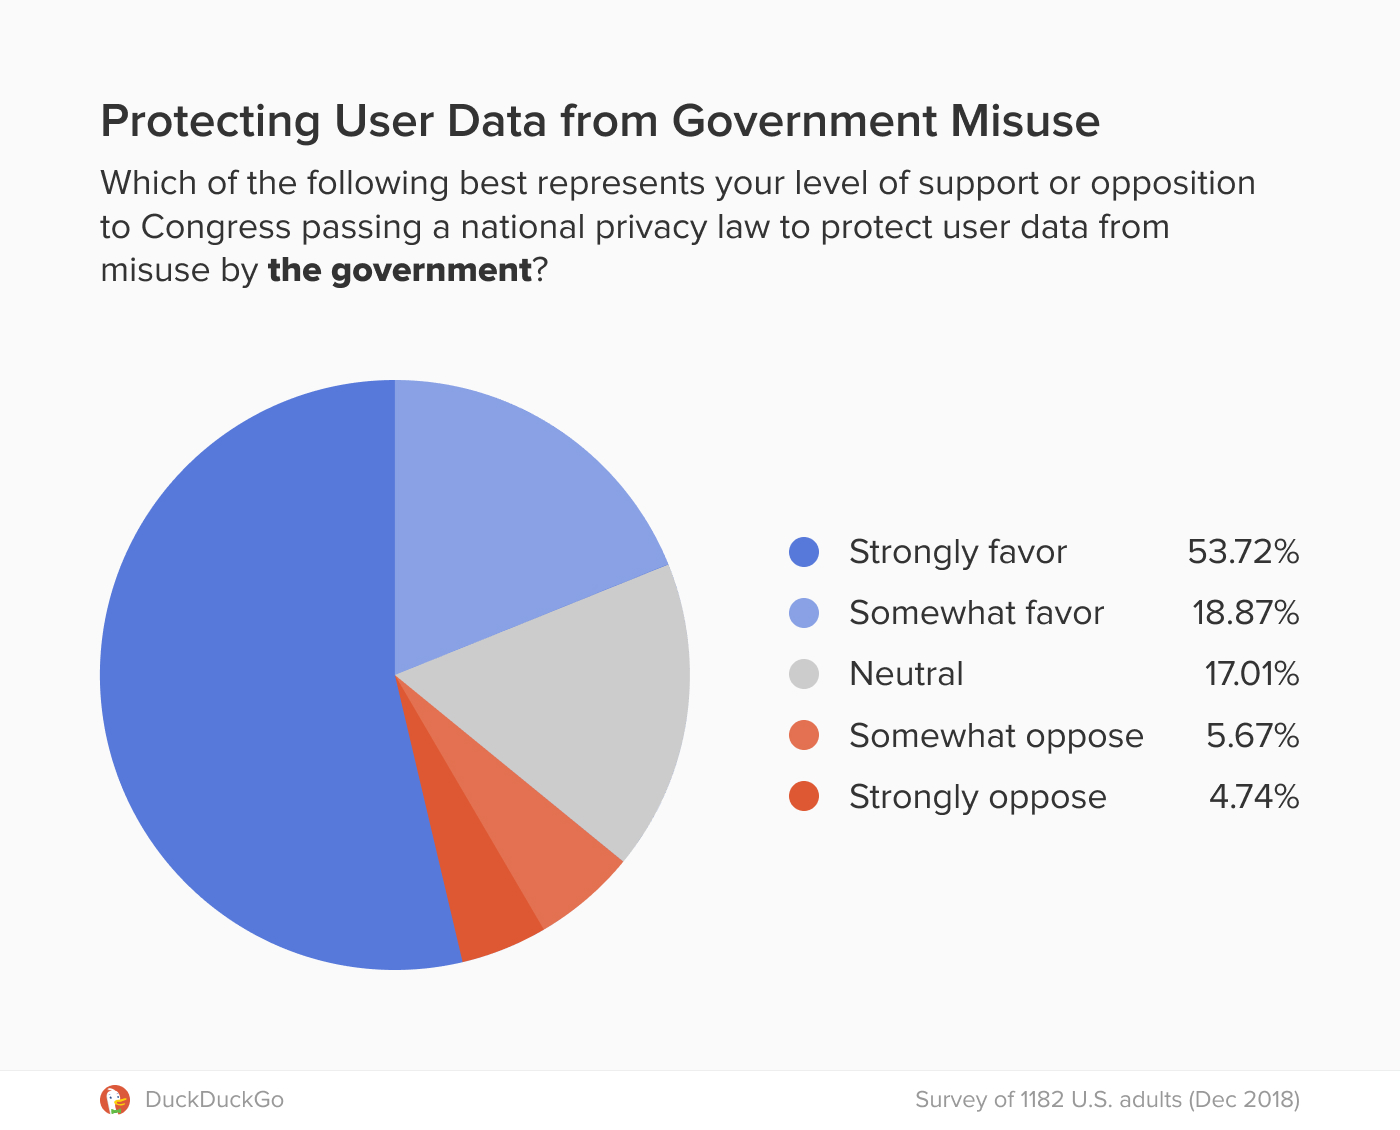 Chart showing support for a privacy law to protect from data misuse by government.